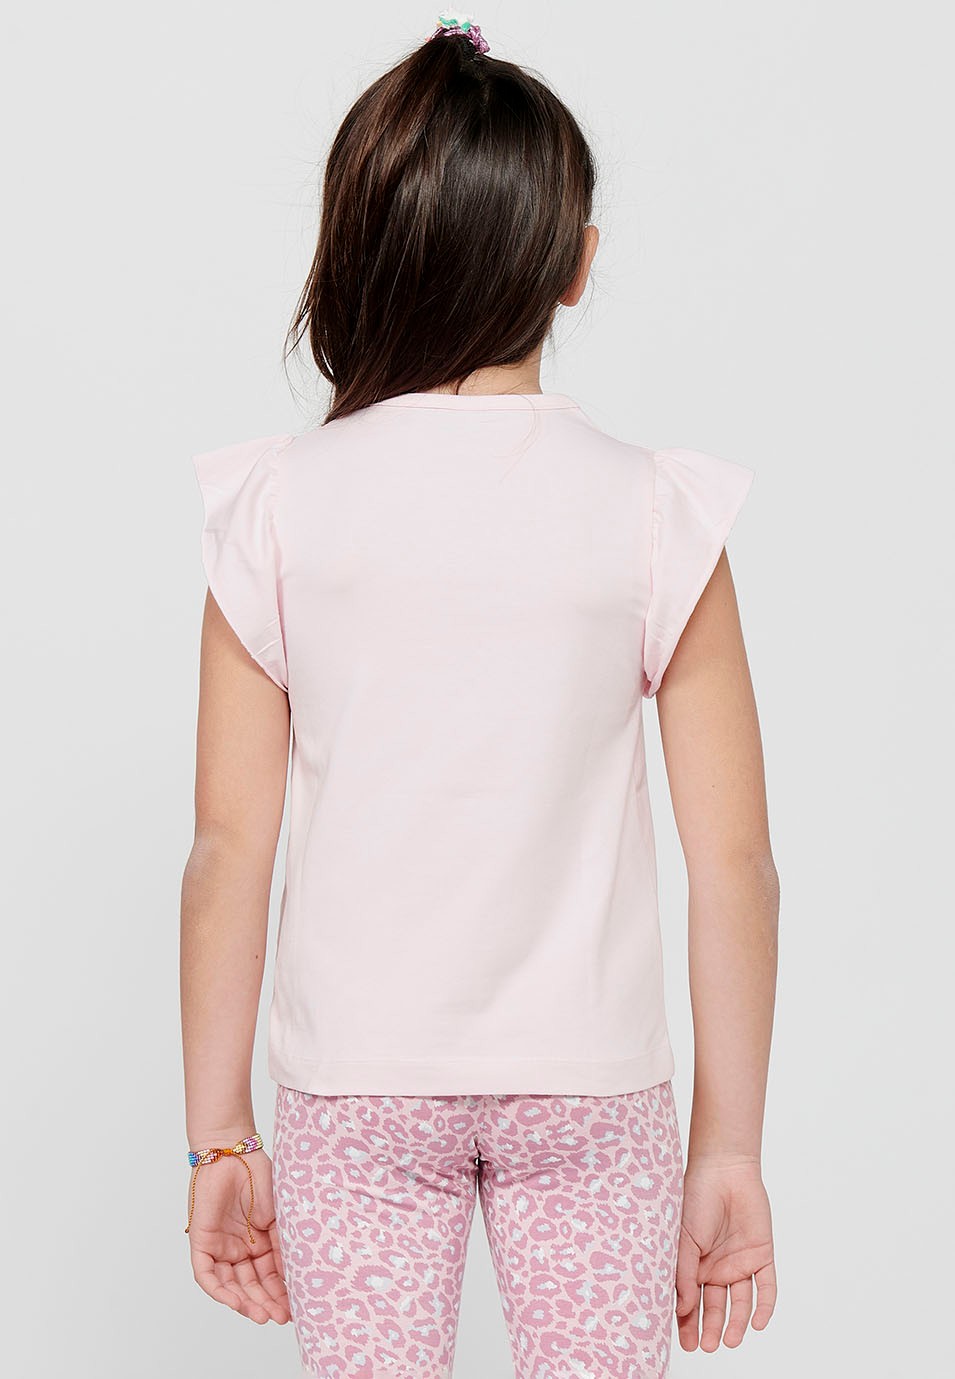 Short Sleeve T-shirt Top with Ruffles and Round Neck with Pink Front Print for Girls 2